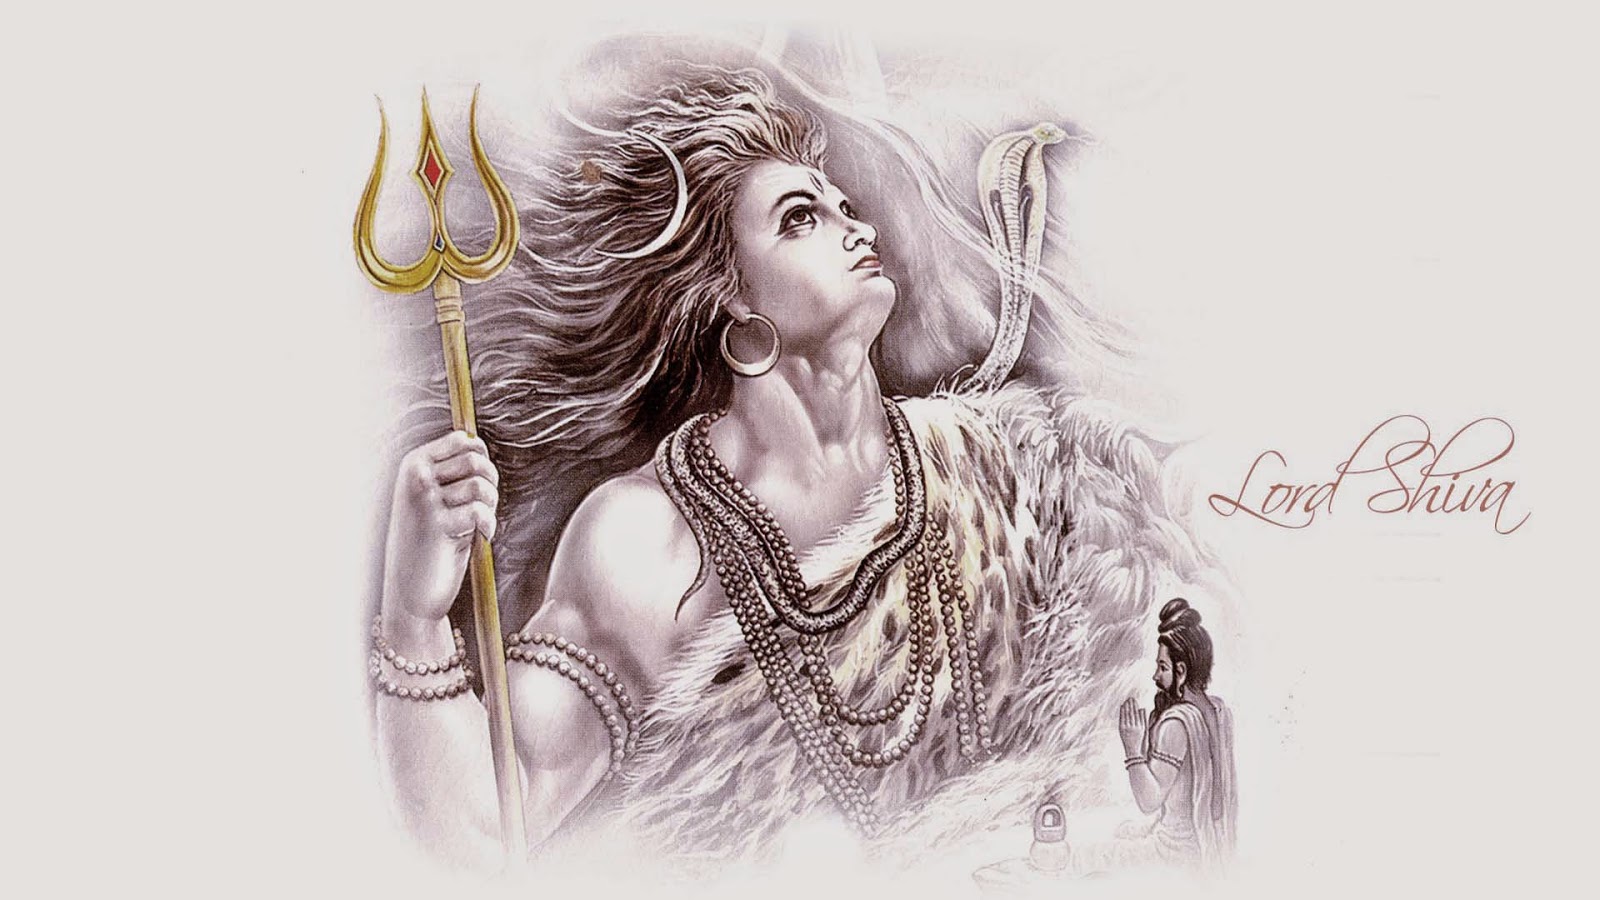 sketches  Photos of lord shiva Shiva lord wallpapers God illustrations